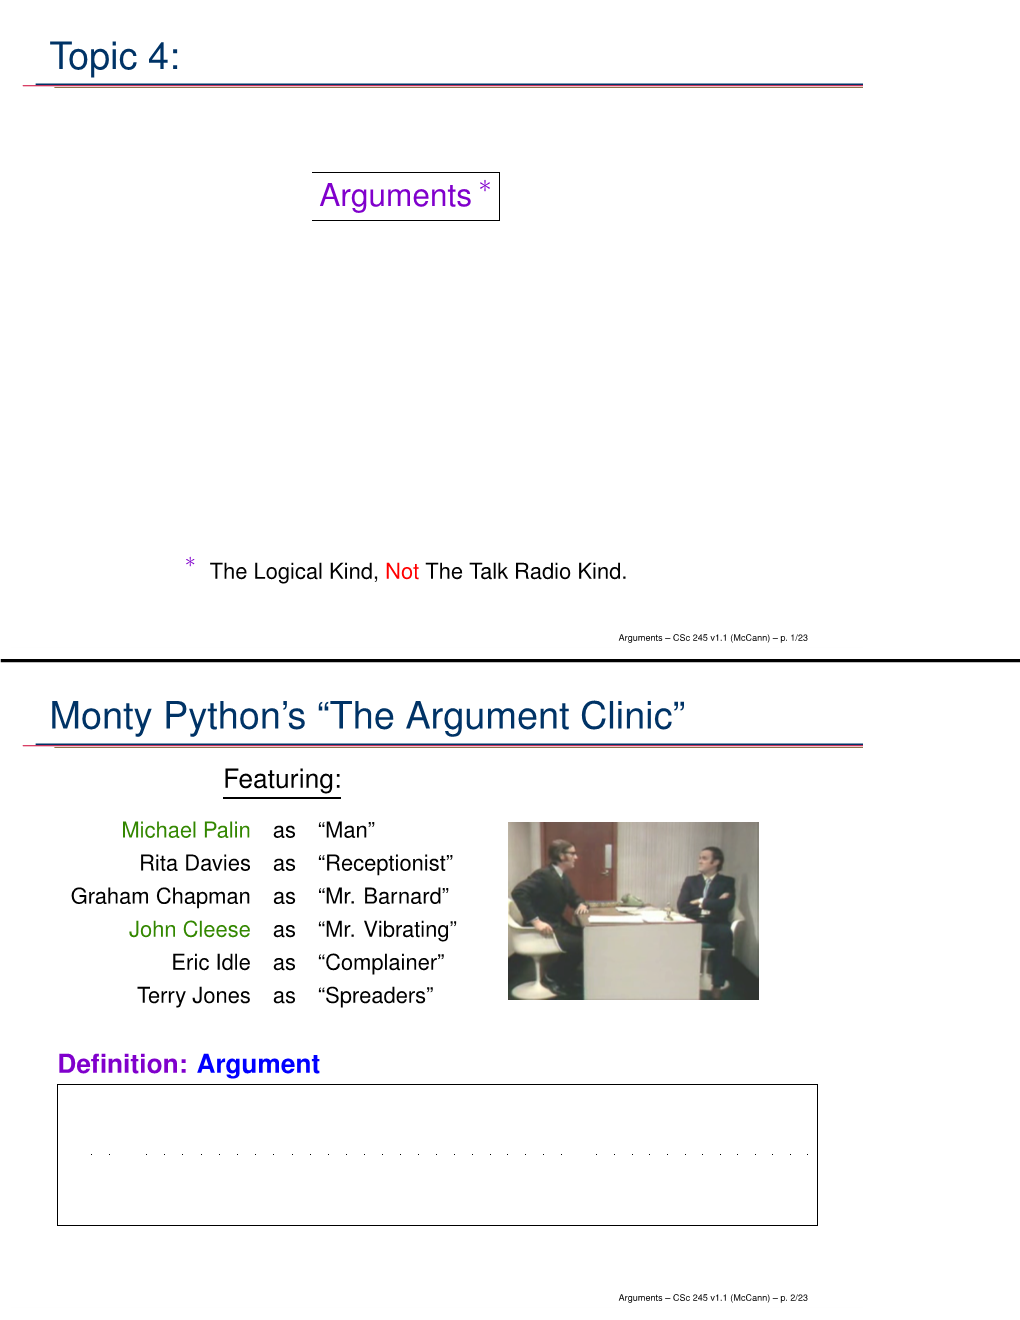 Topic 4: Monty Python's “The Argument Clinic”